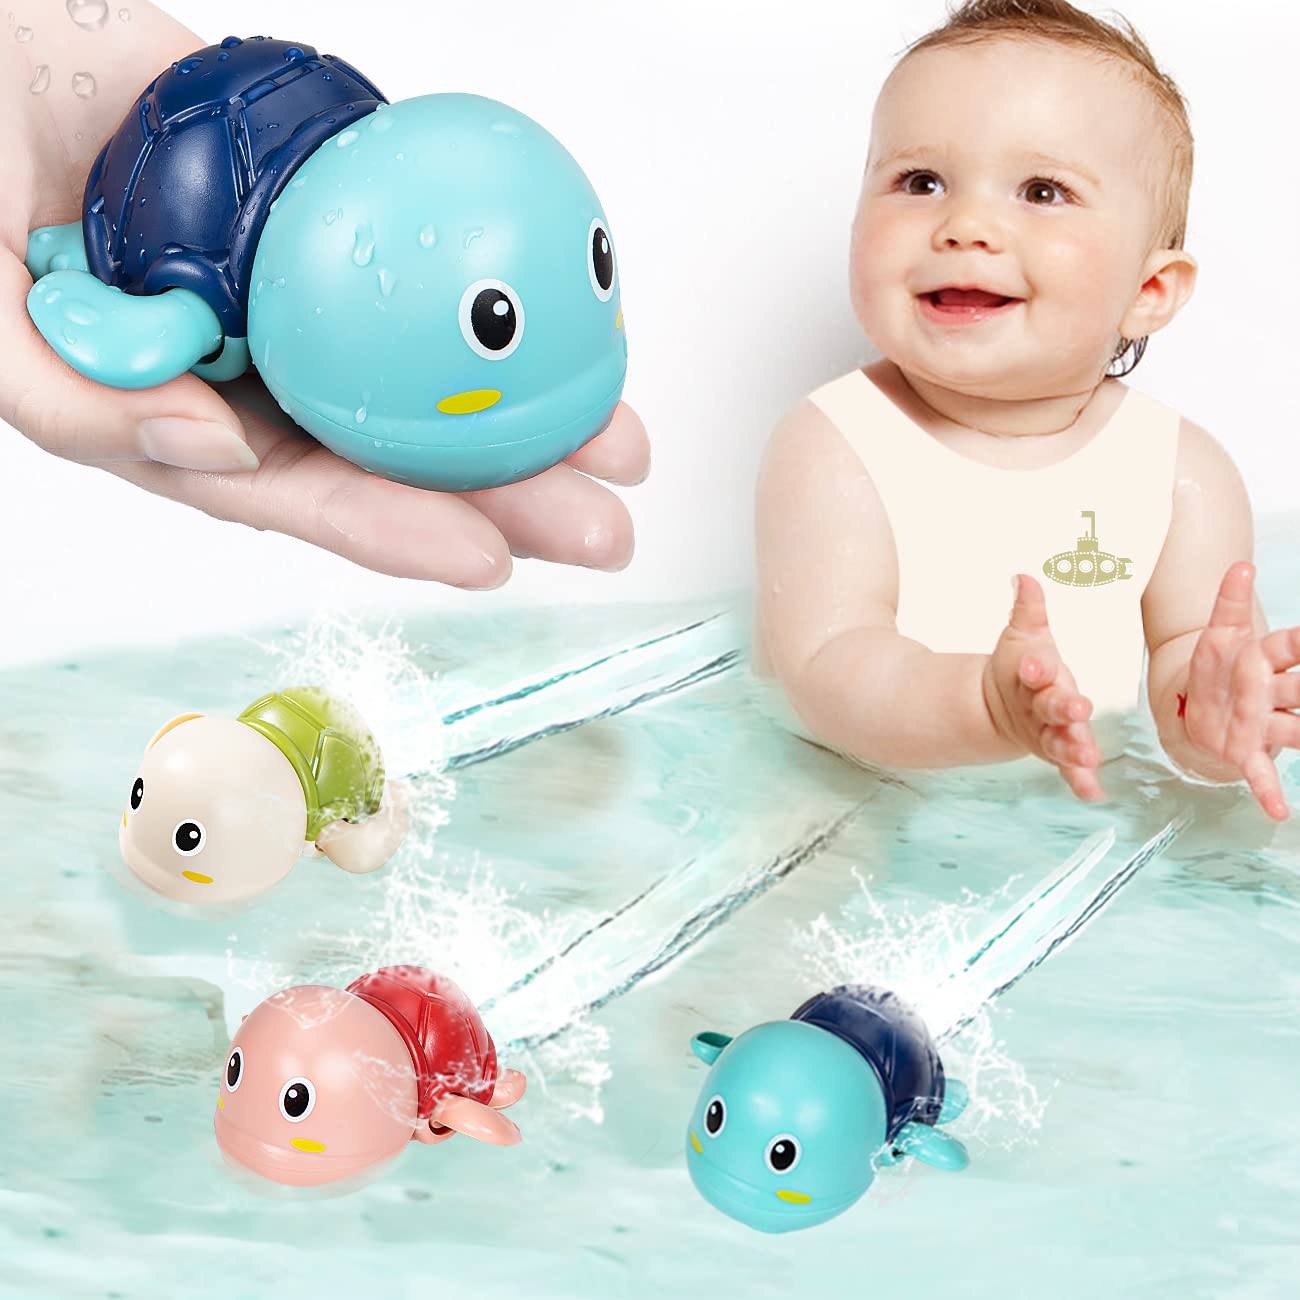 SEPHIX Bath Toys for Toddlers 1-3, Cute Swimming Turtle Bath Toys for 1 2 Year Old Boy Girl Gifts, Water Pool Toys for Baby Toddler Toys Age 1-4, Wind-up Infant Bathtub Toys, 3 Pack